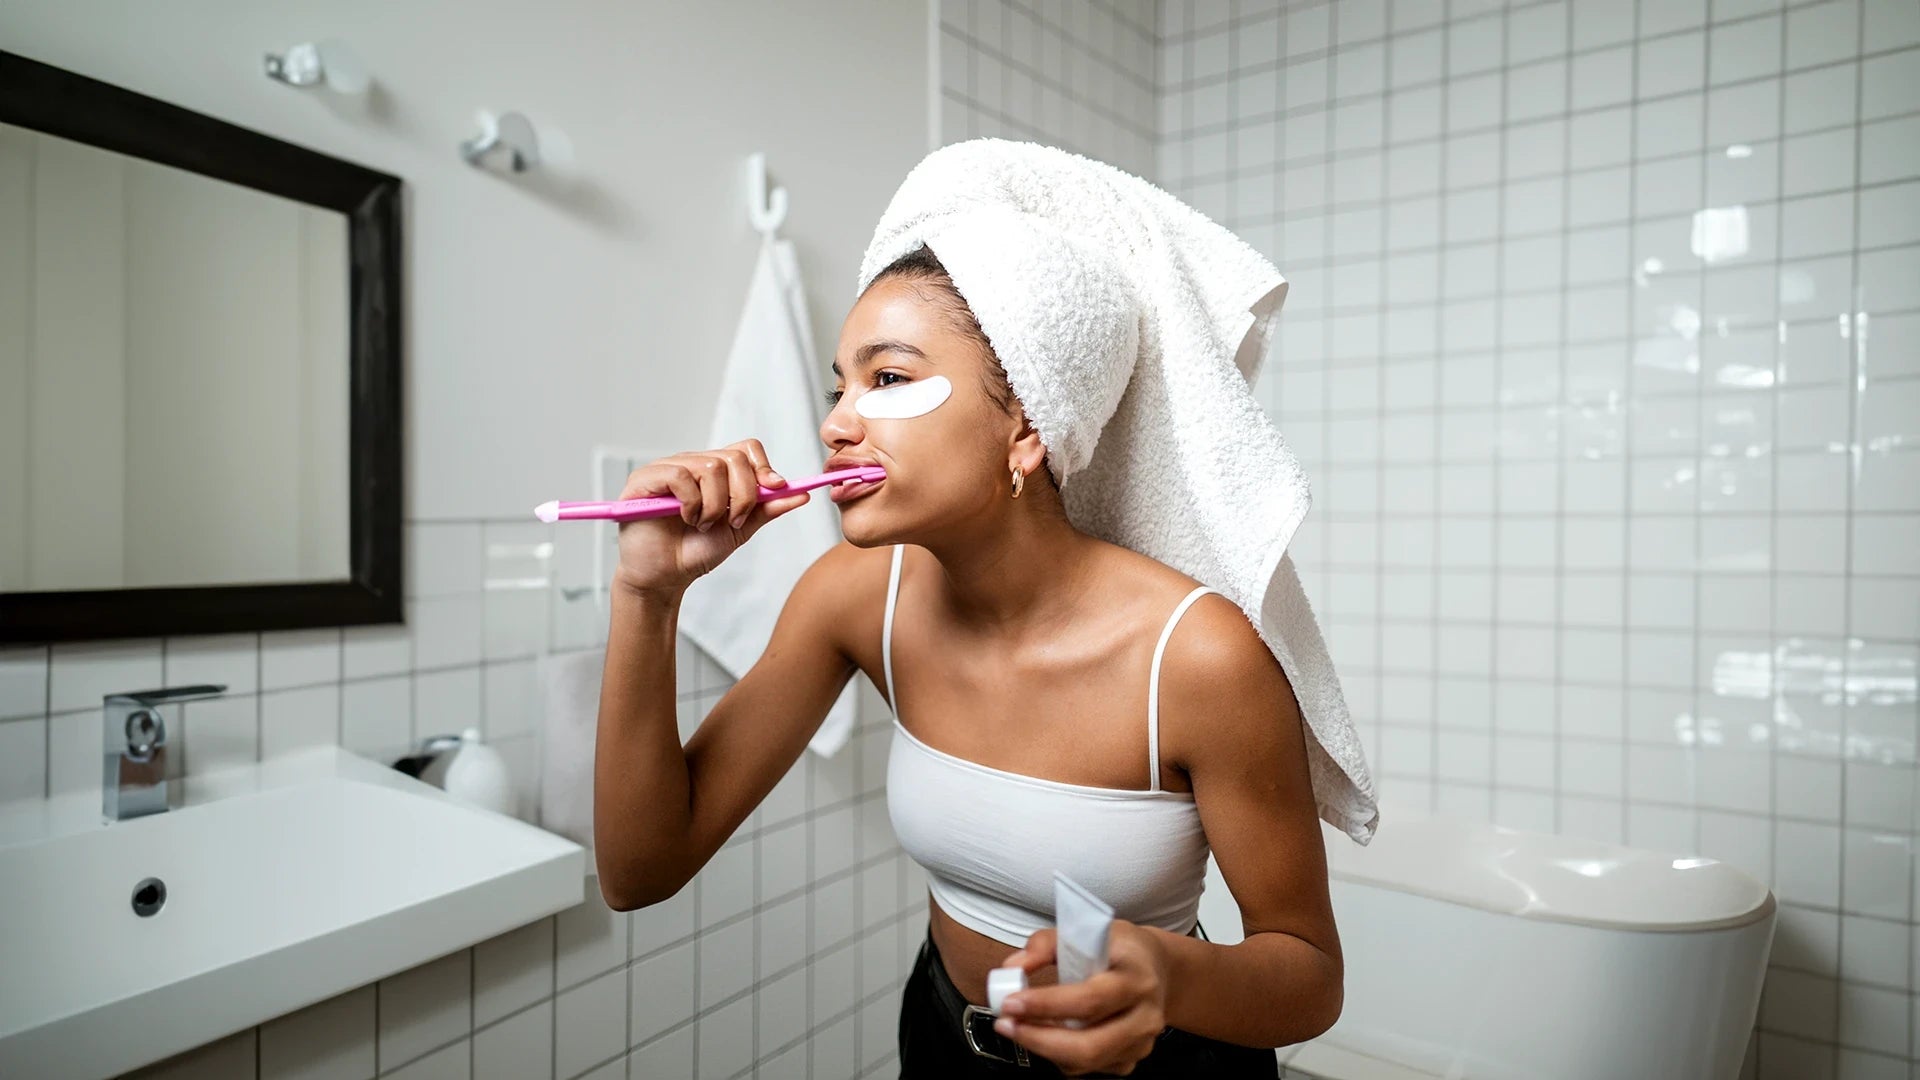 Young woman brushing her teeth in the bathroom